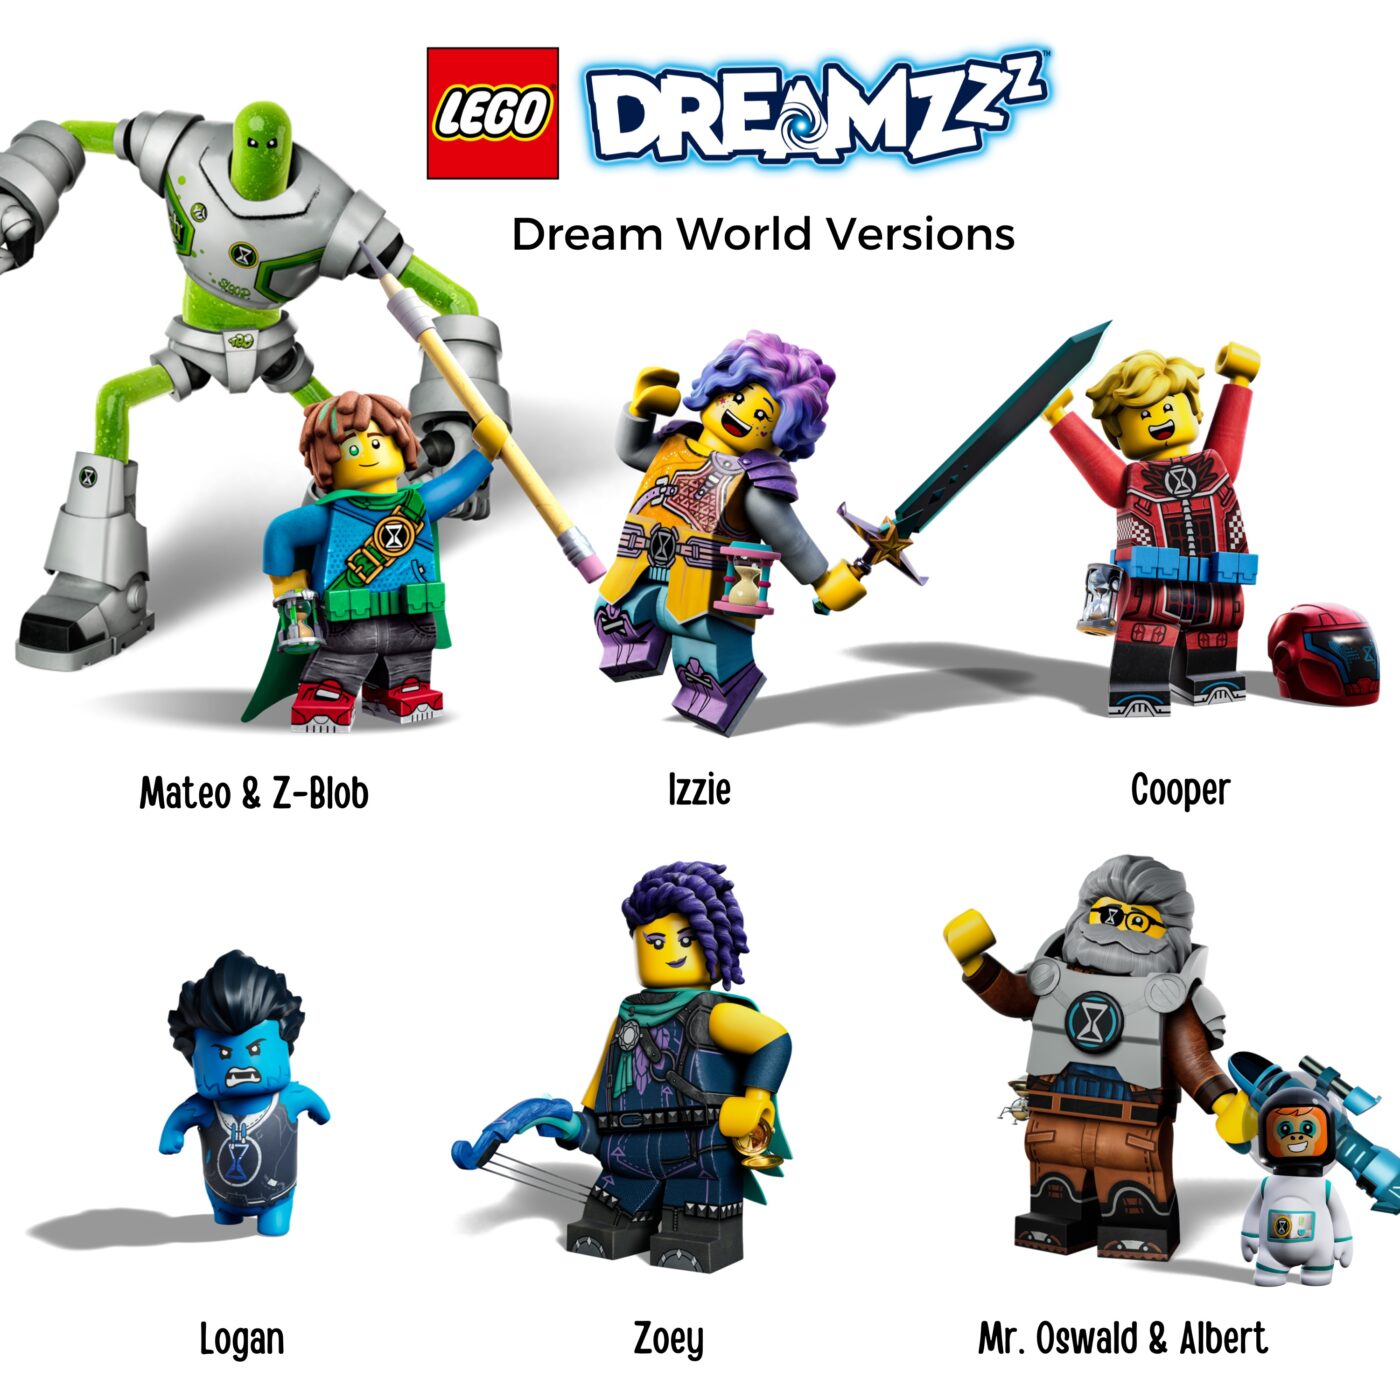 Meet the characters of LEGO DreamZzz before you stream the series